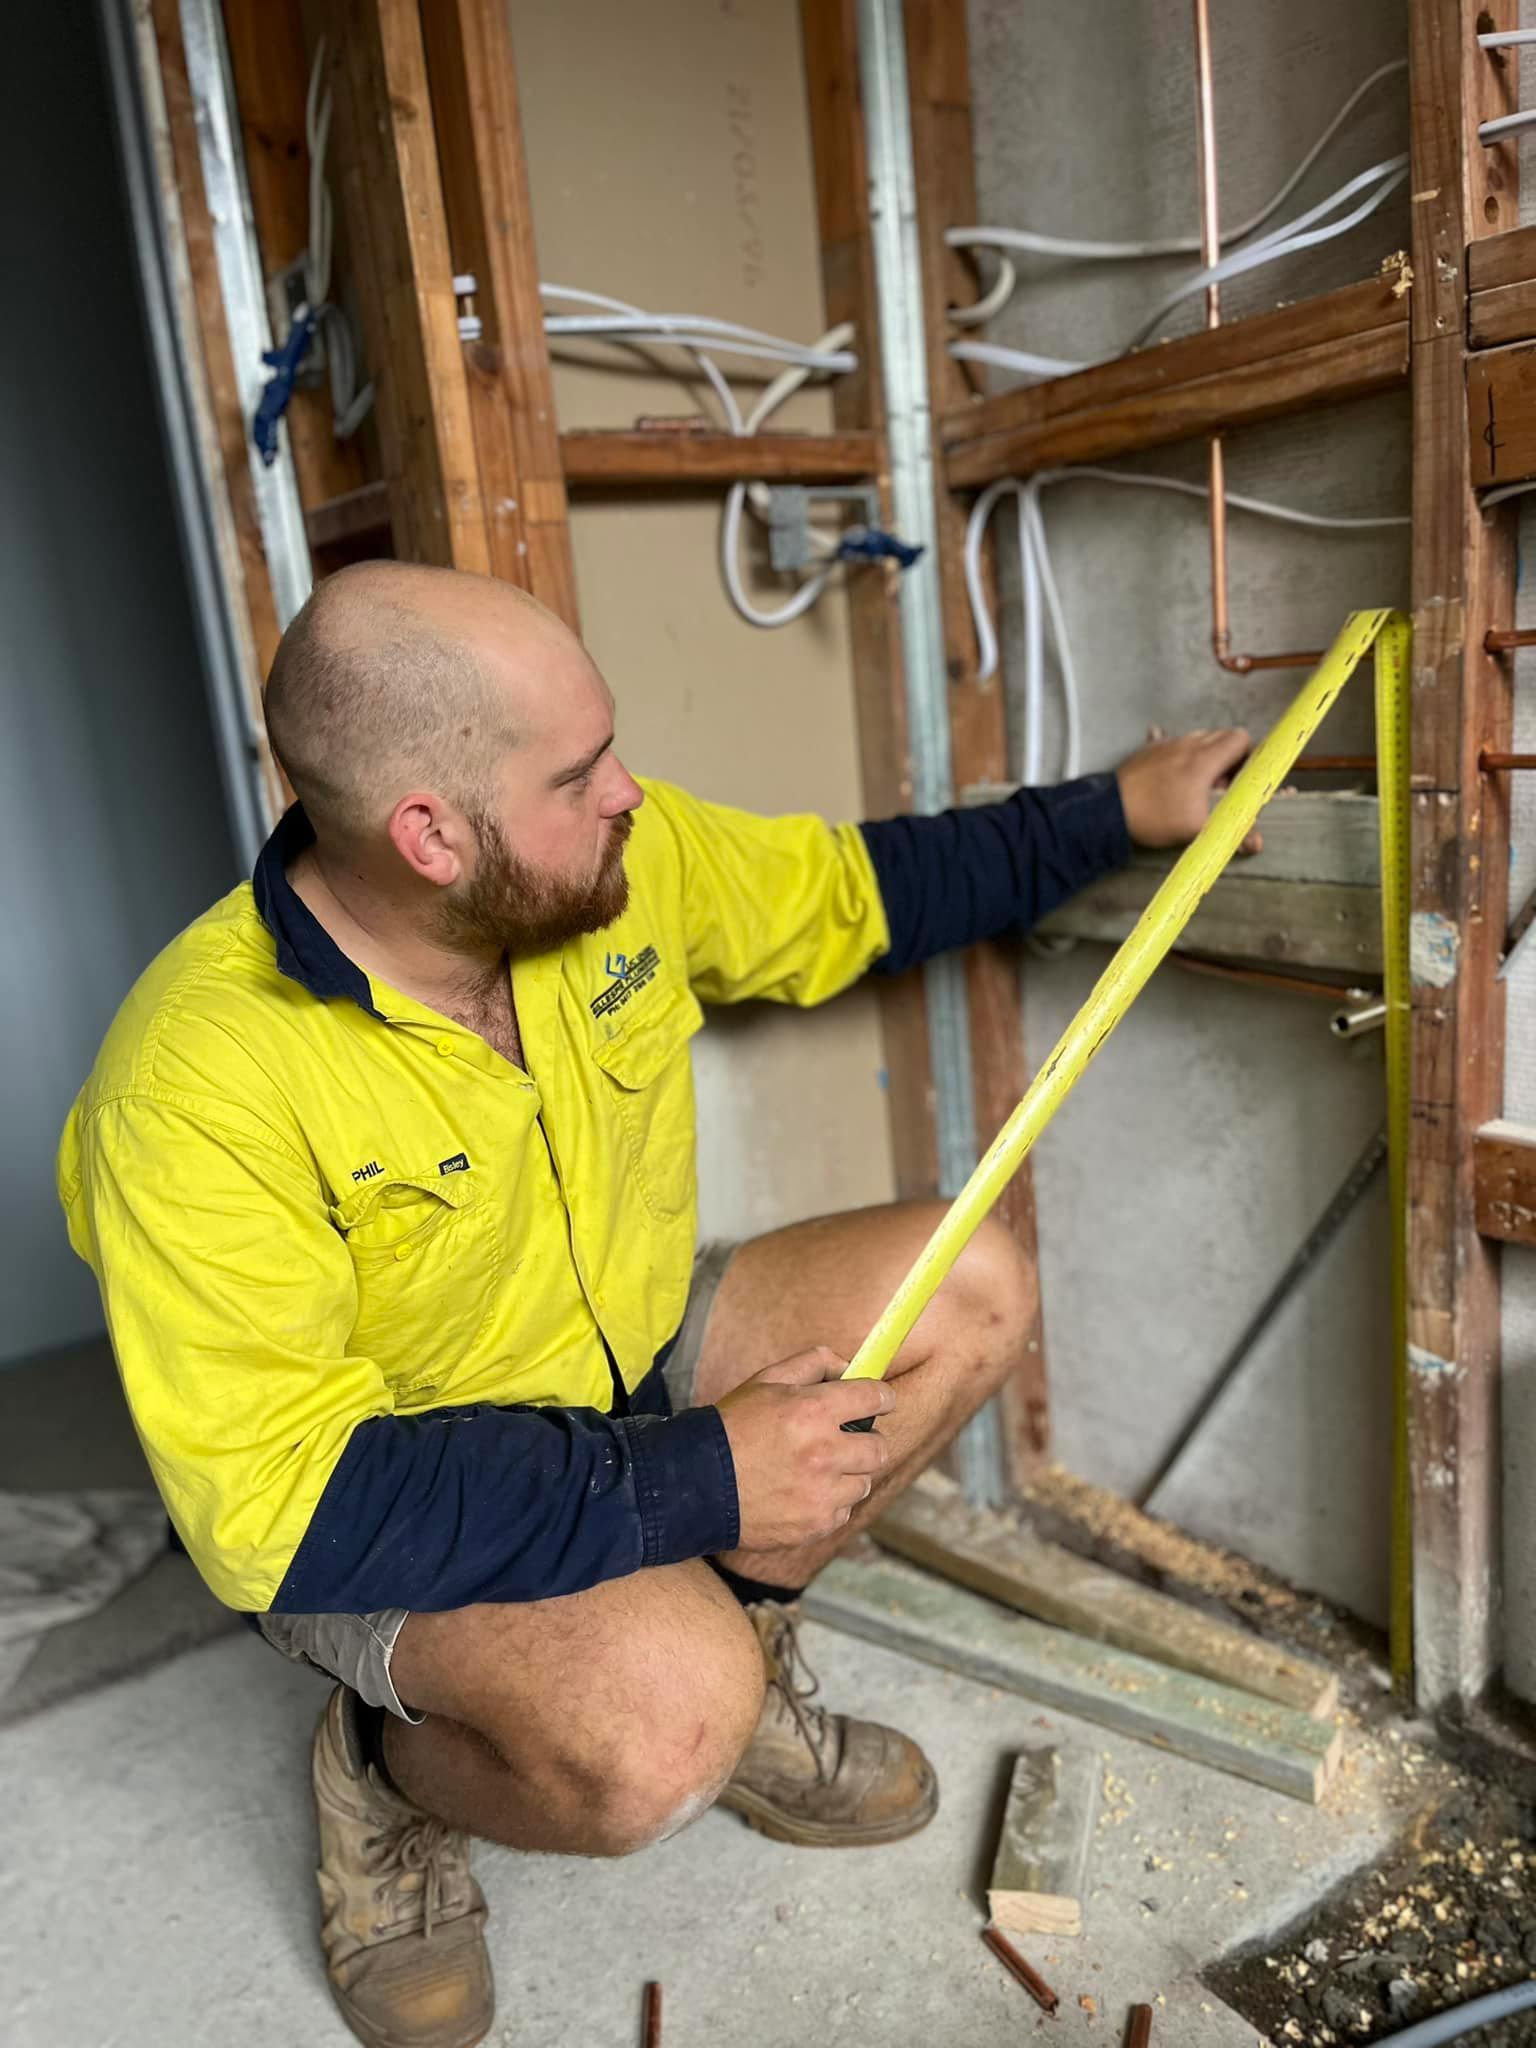 Commercial Plumber Checking Pipes